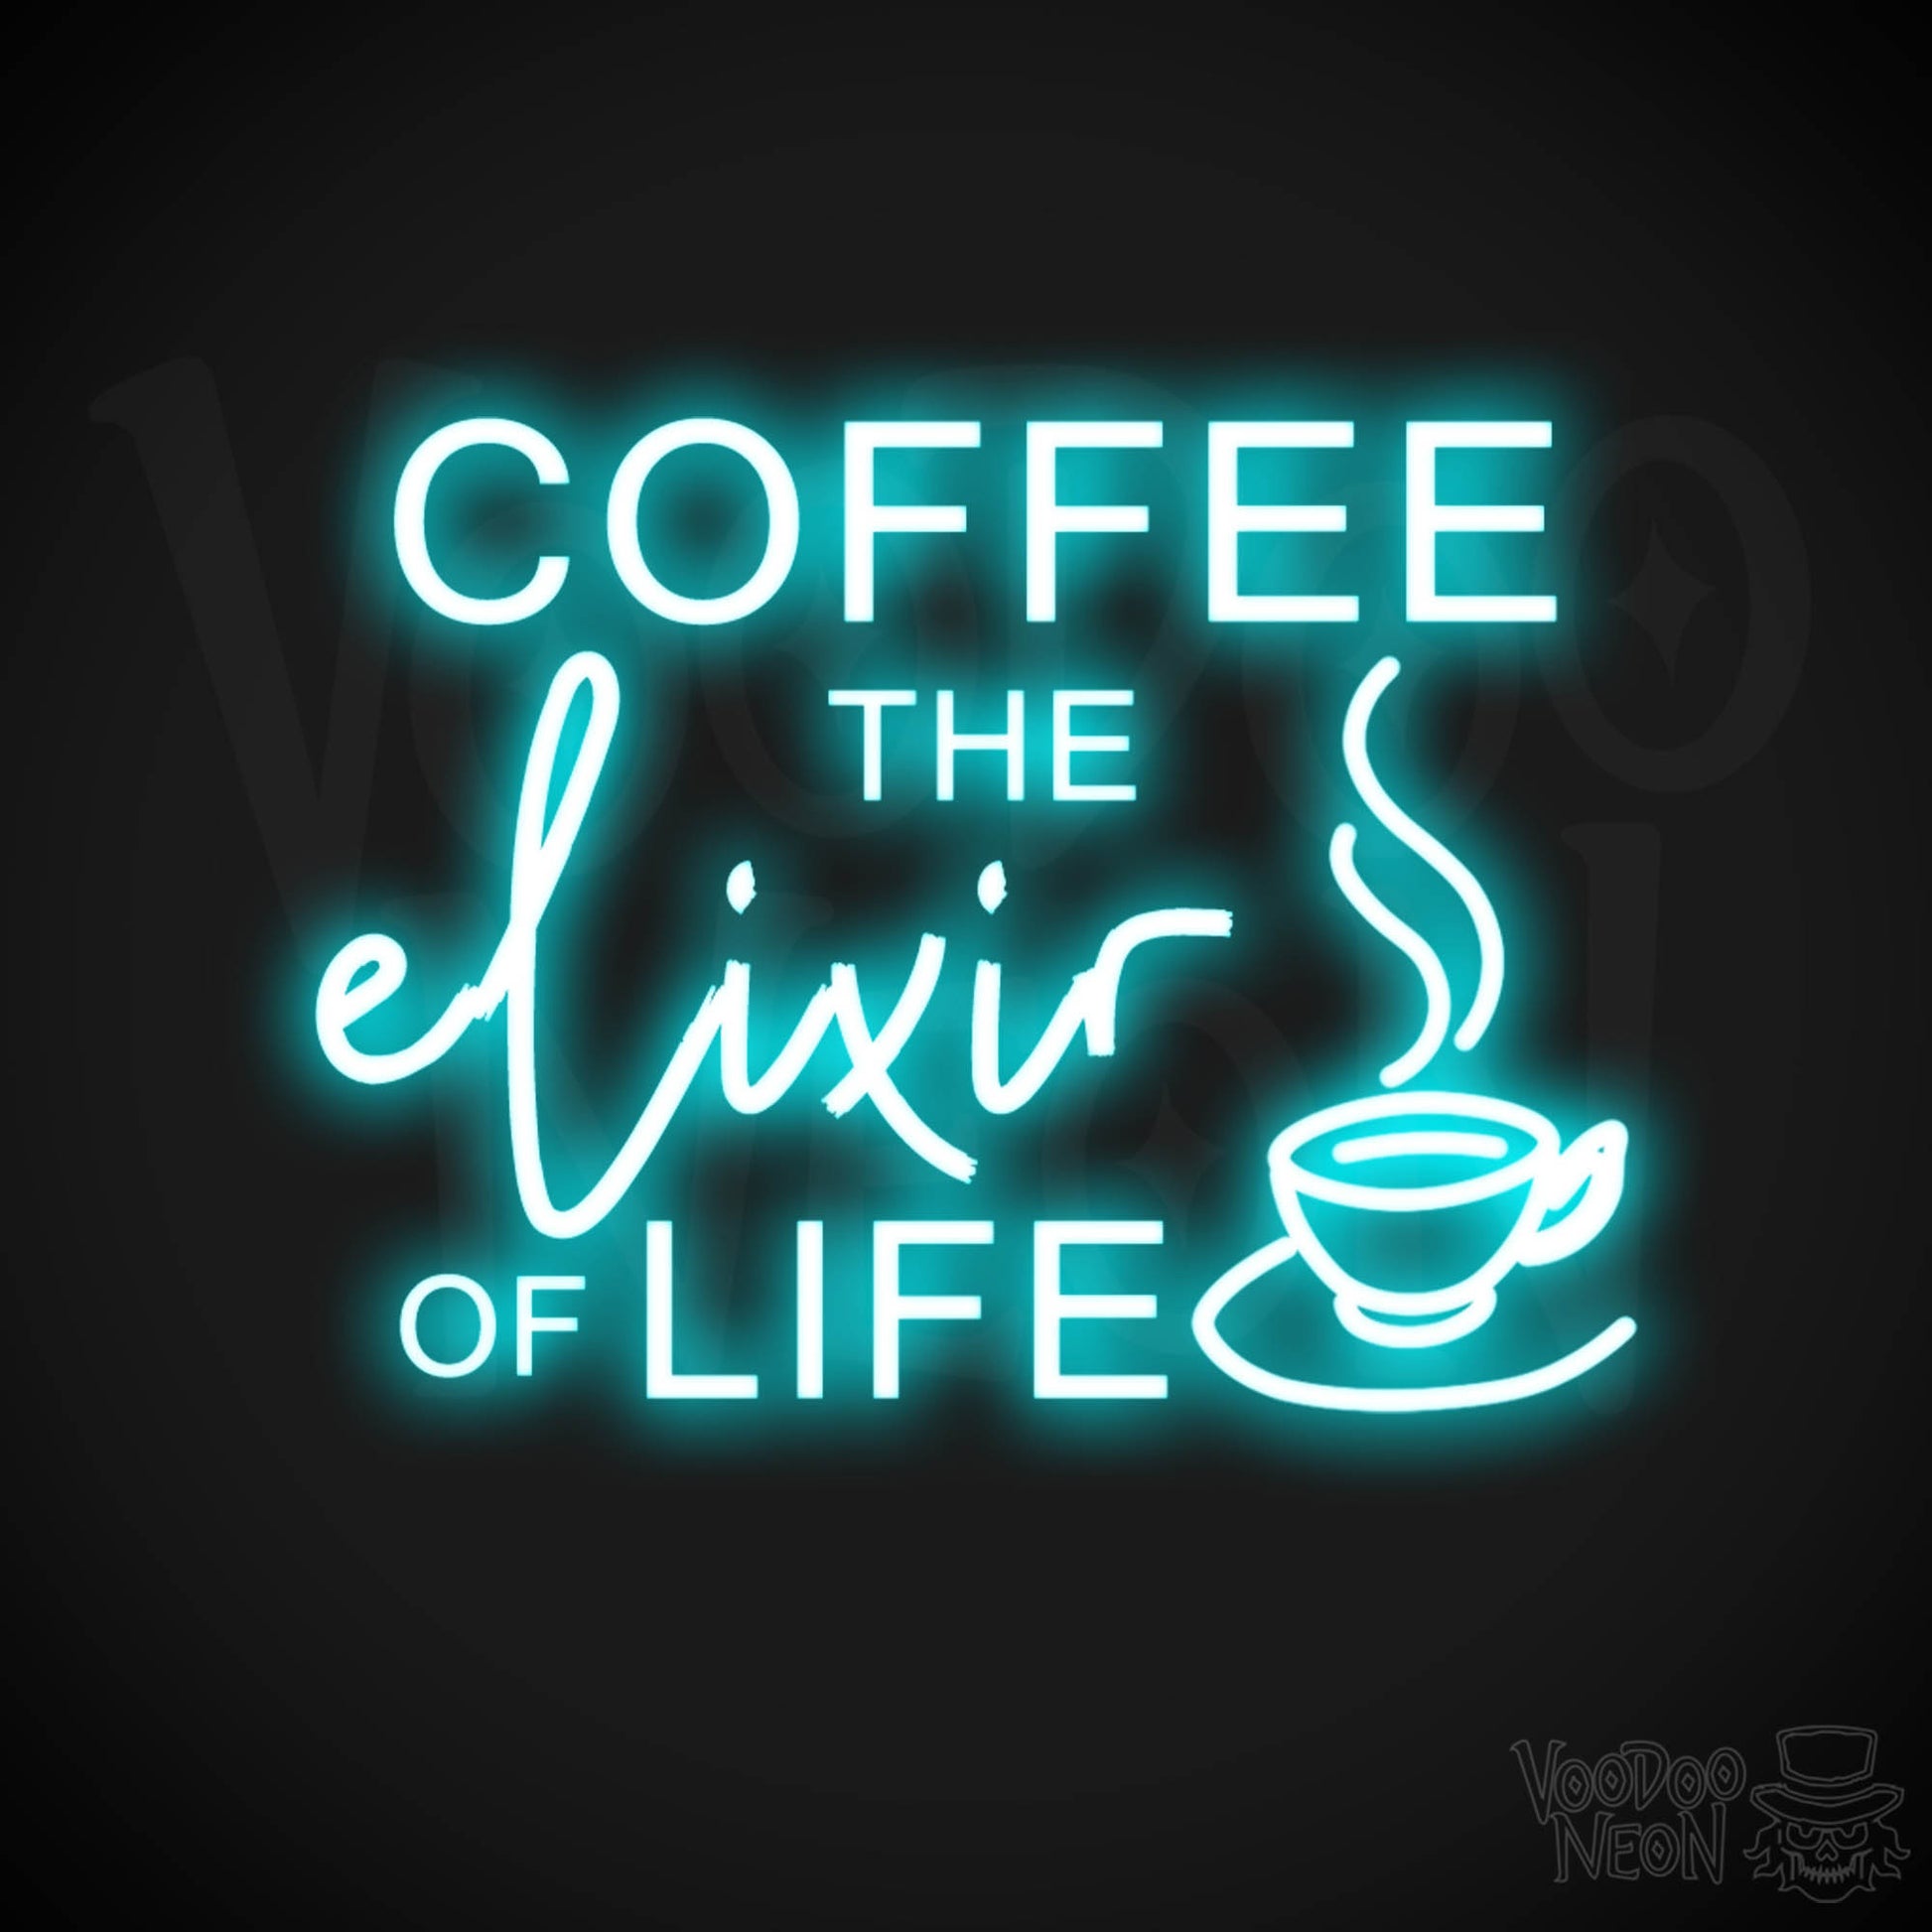 Coffee - The Elixir Of Life Neon Sign - The Elixir Of Life Sign - Color Ice Blue